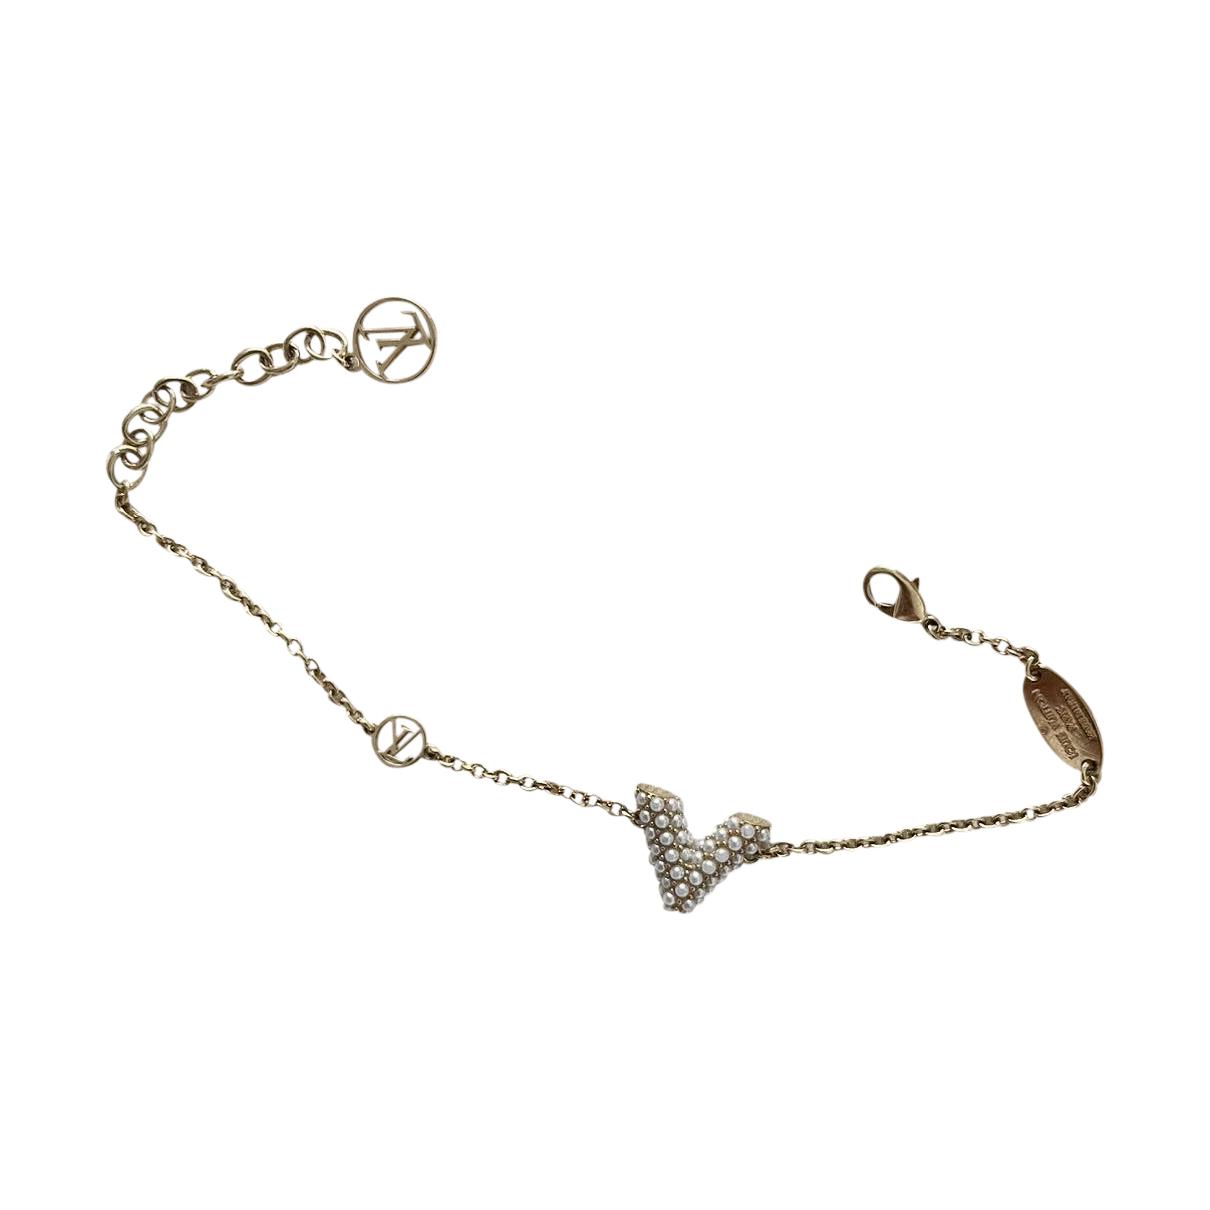 Blooming bracelet Louis Vuitton Gold in Other - 34283376